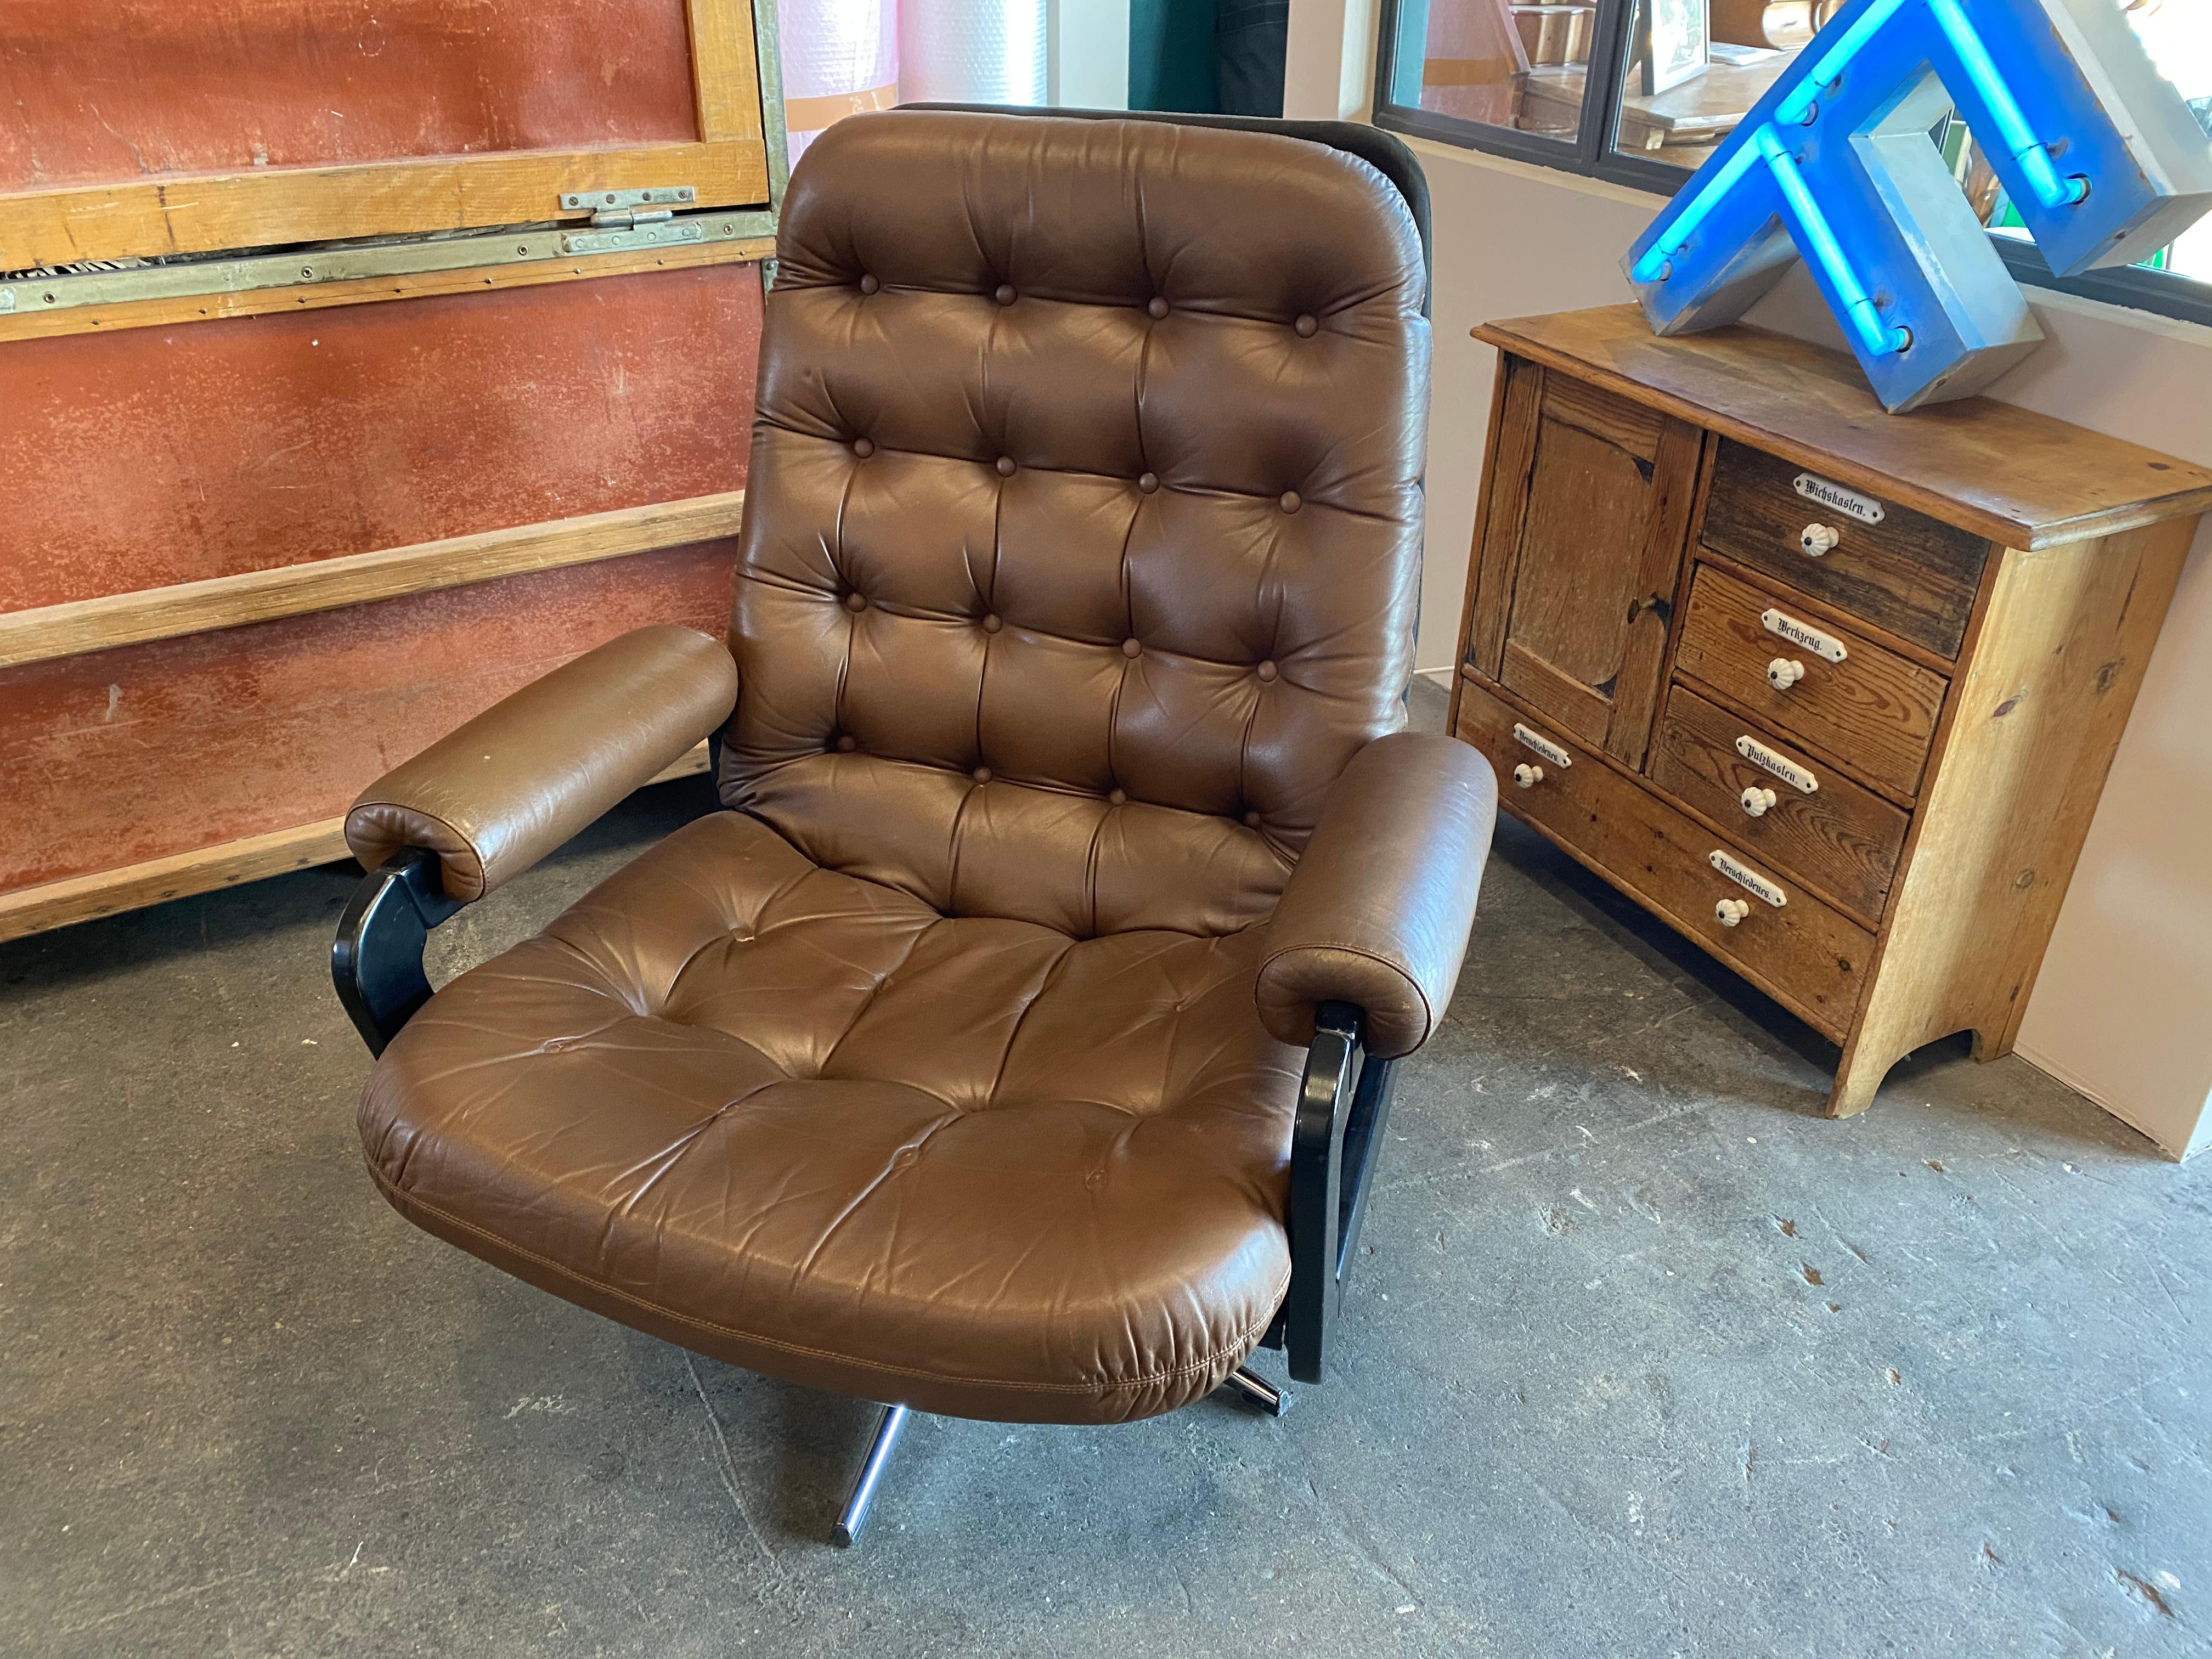 Chesterfield look lounge armchair designed in the 1970s. The armchair is upholstered, covered with brown faux leather and decorated with matching buttons. The base is chrome-plated. The design with the high back and armrests makes the armchair a